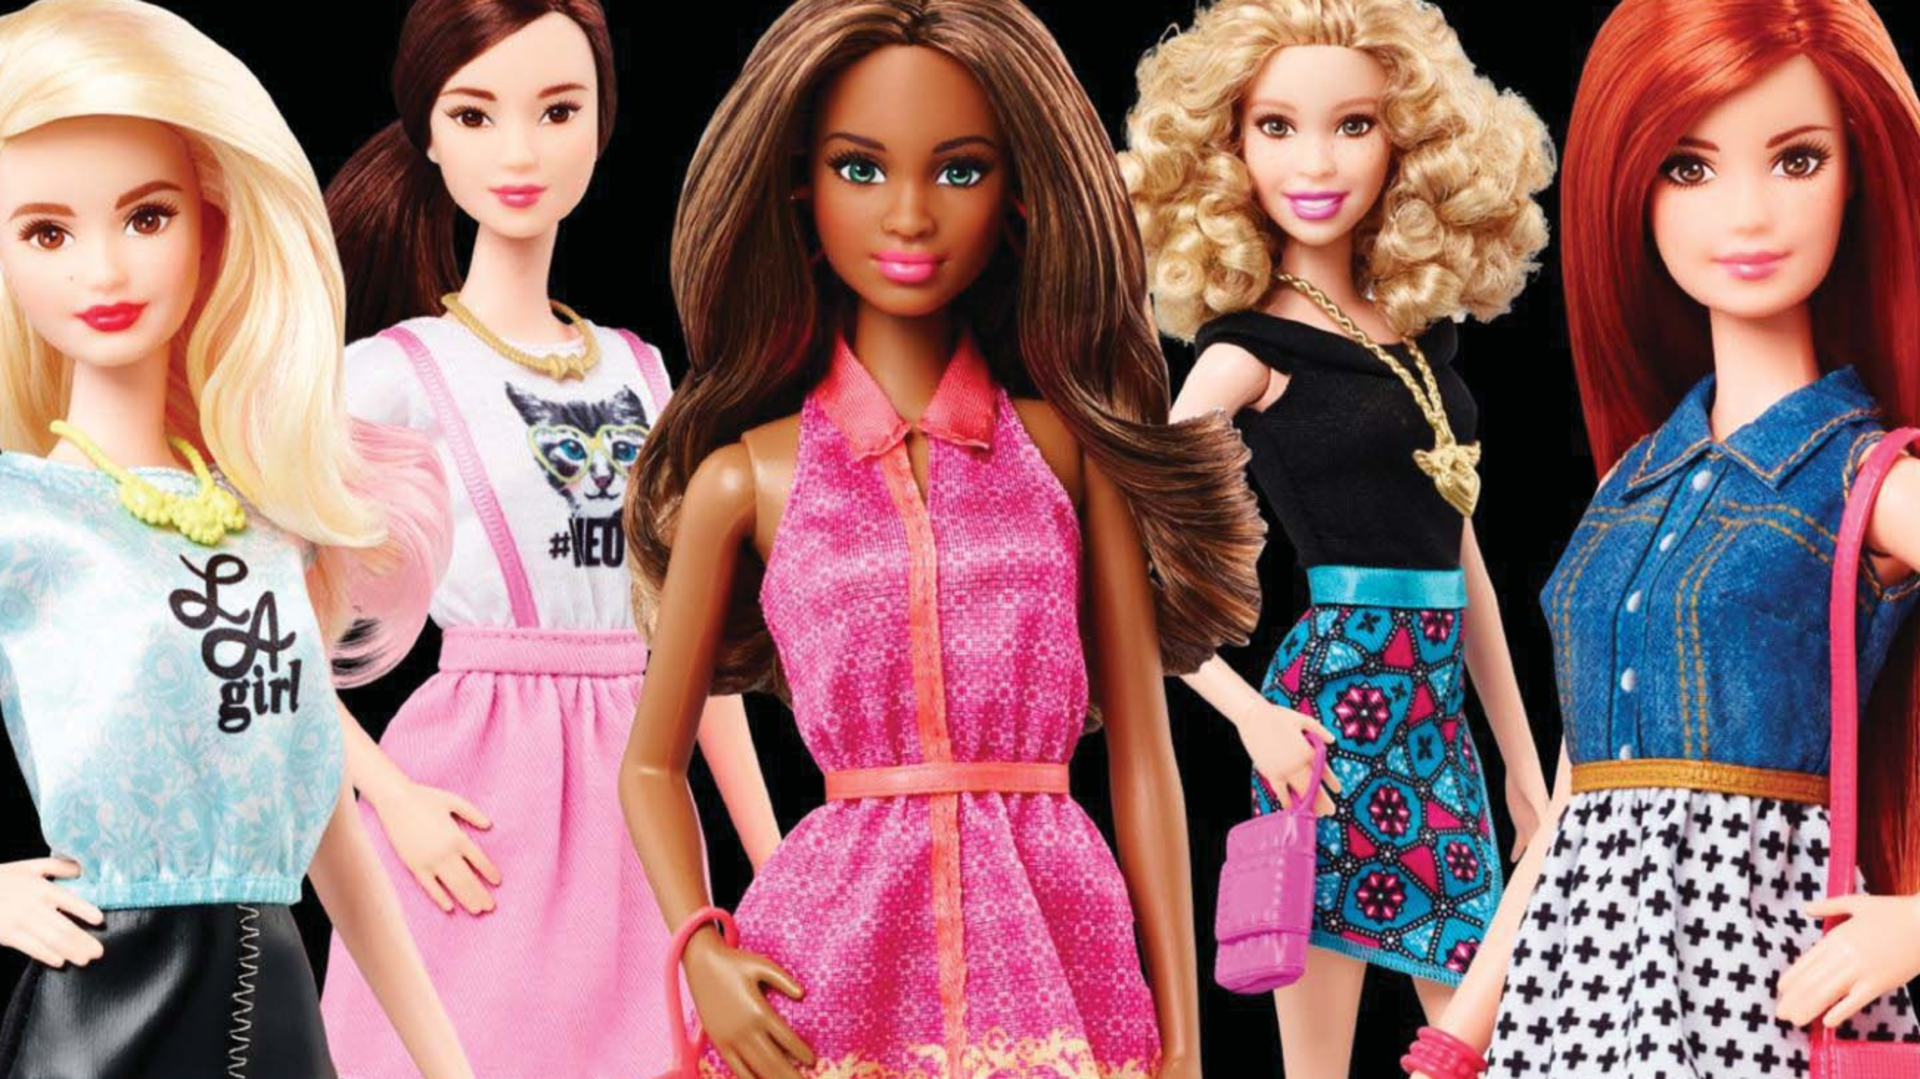 Barbie collections. Барби фашионистас 2022. Куклы Барби фашионистас 2015. Барби фашионистас 84. Барби Маттел 2015.